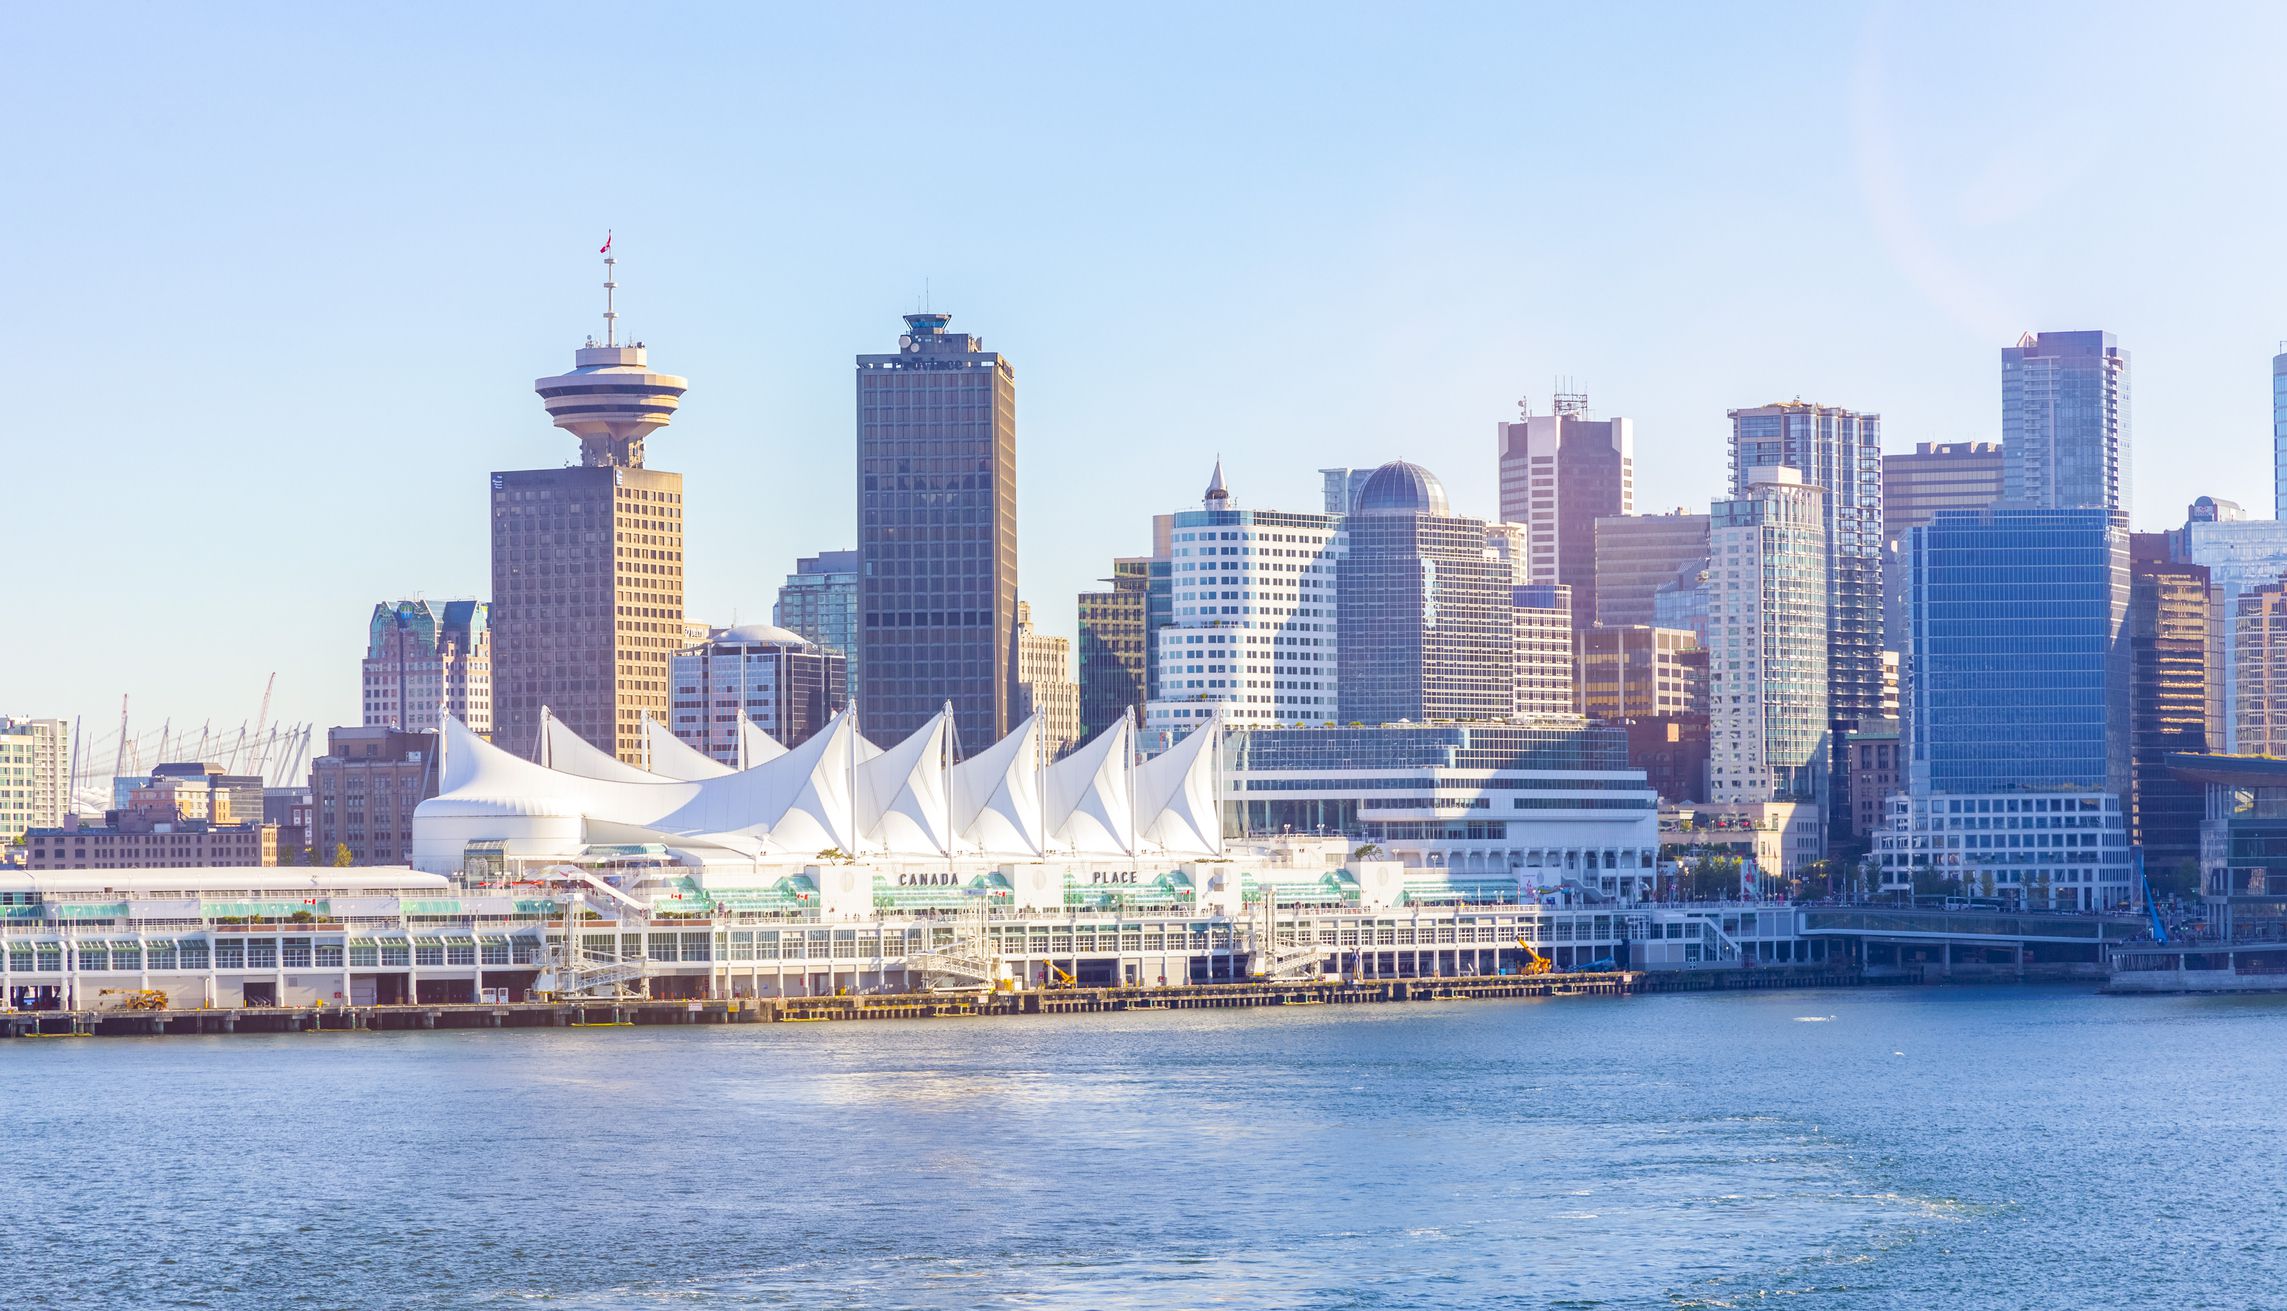 Canada Place Vancouver: The Complete Guide